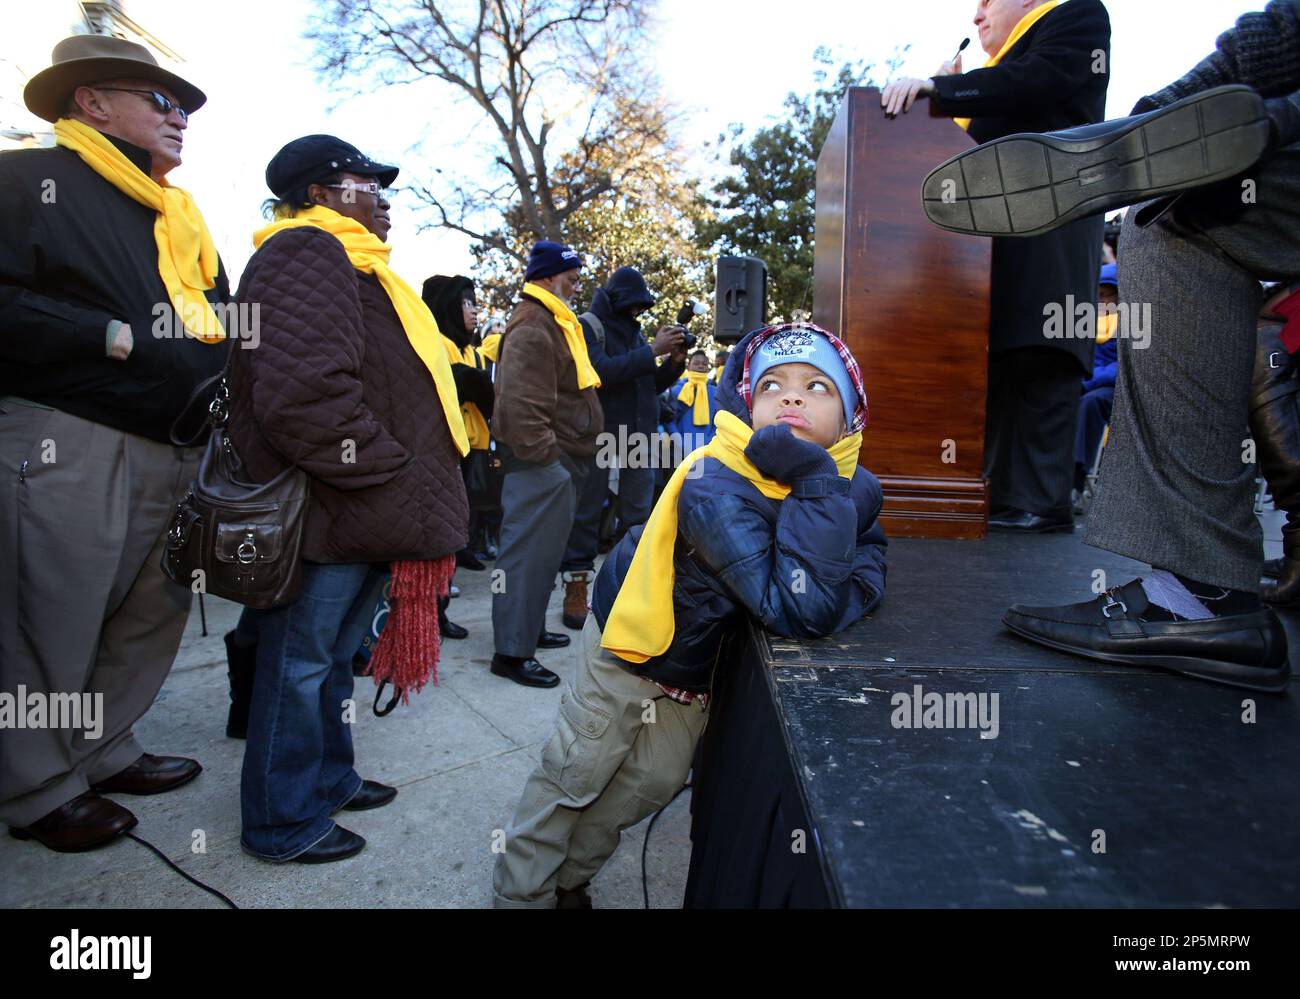 Solomon Dean, 7, of Austell, looks back at his mother, Edith Dean, as he waits during a speaker's presentation during the fourth annual Georgia School Choice Celebration and Rally at the west entrance to the Capitol Thursday, Jan. 31, 2013, in Atlanta. More than 2,000 public, private, and home school students met outside the Georgia State Capitol Thursday to call for the expansion of educational opportunities for kids. (AP Photo/Atlanta Journal-Constitution, Jason Getz) MARIETTA DAILY OUT; GWINNETT DAILY POST OUT; LOCAL TV OUT; WXIA-TV OUT; WGCL-TV OUT Stock Photo